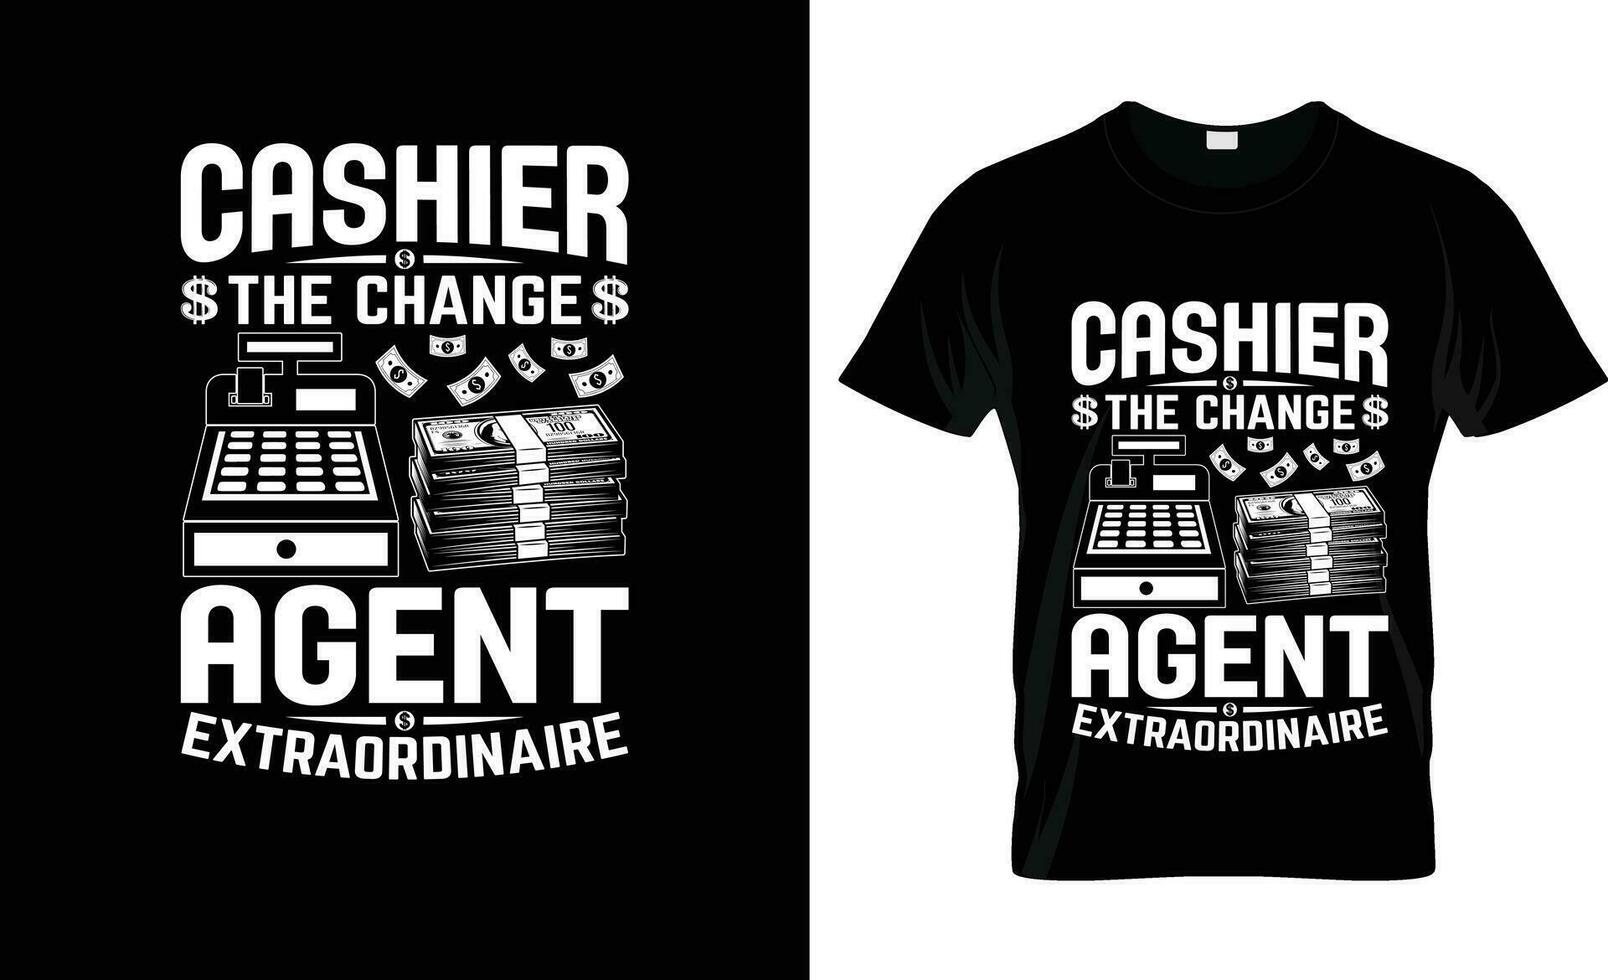 cashier the change agent extraordinaire colorful Graphic T-Shirt,  t-shirt print mockup vector